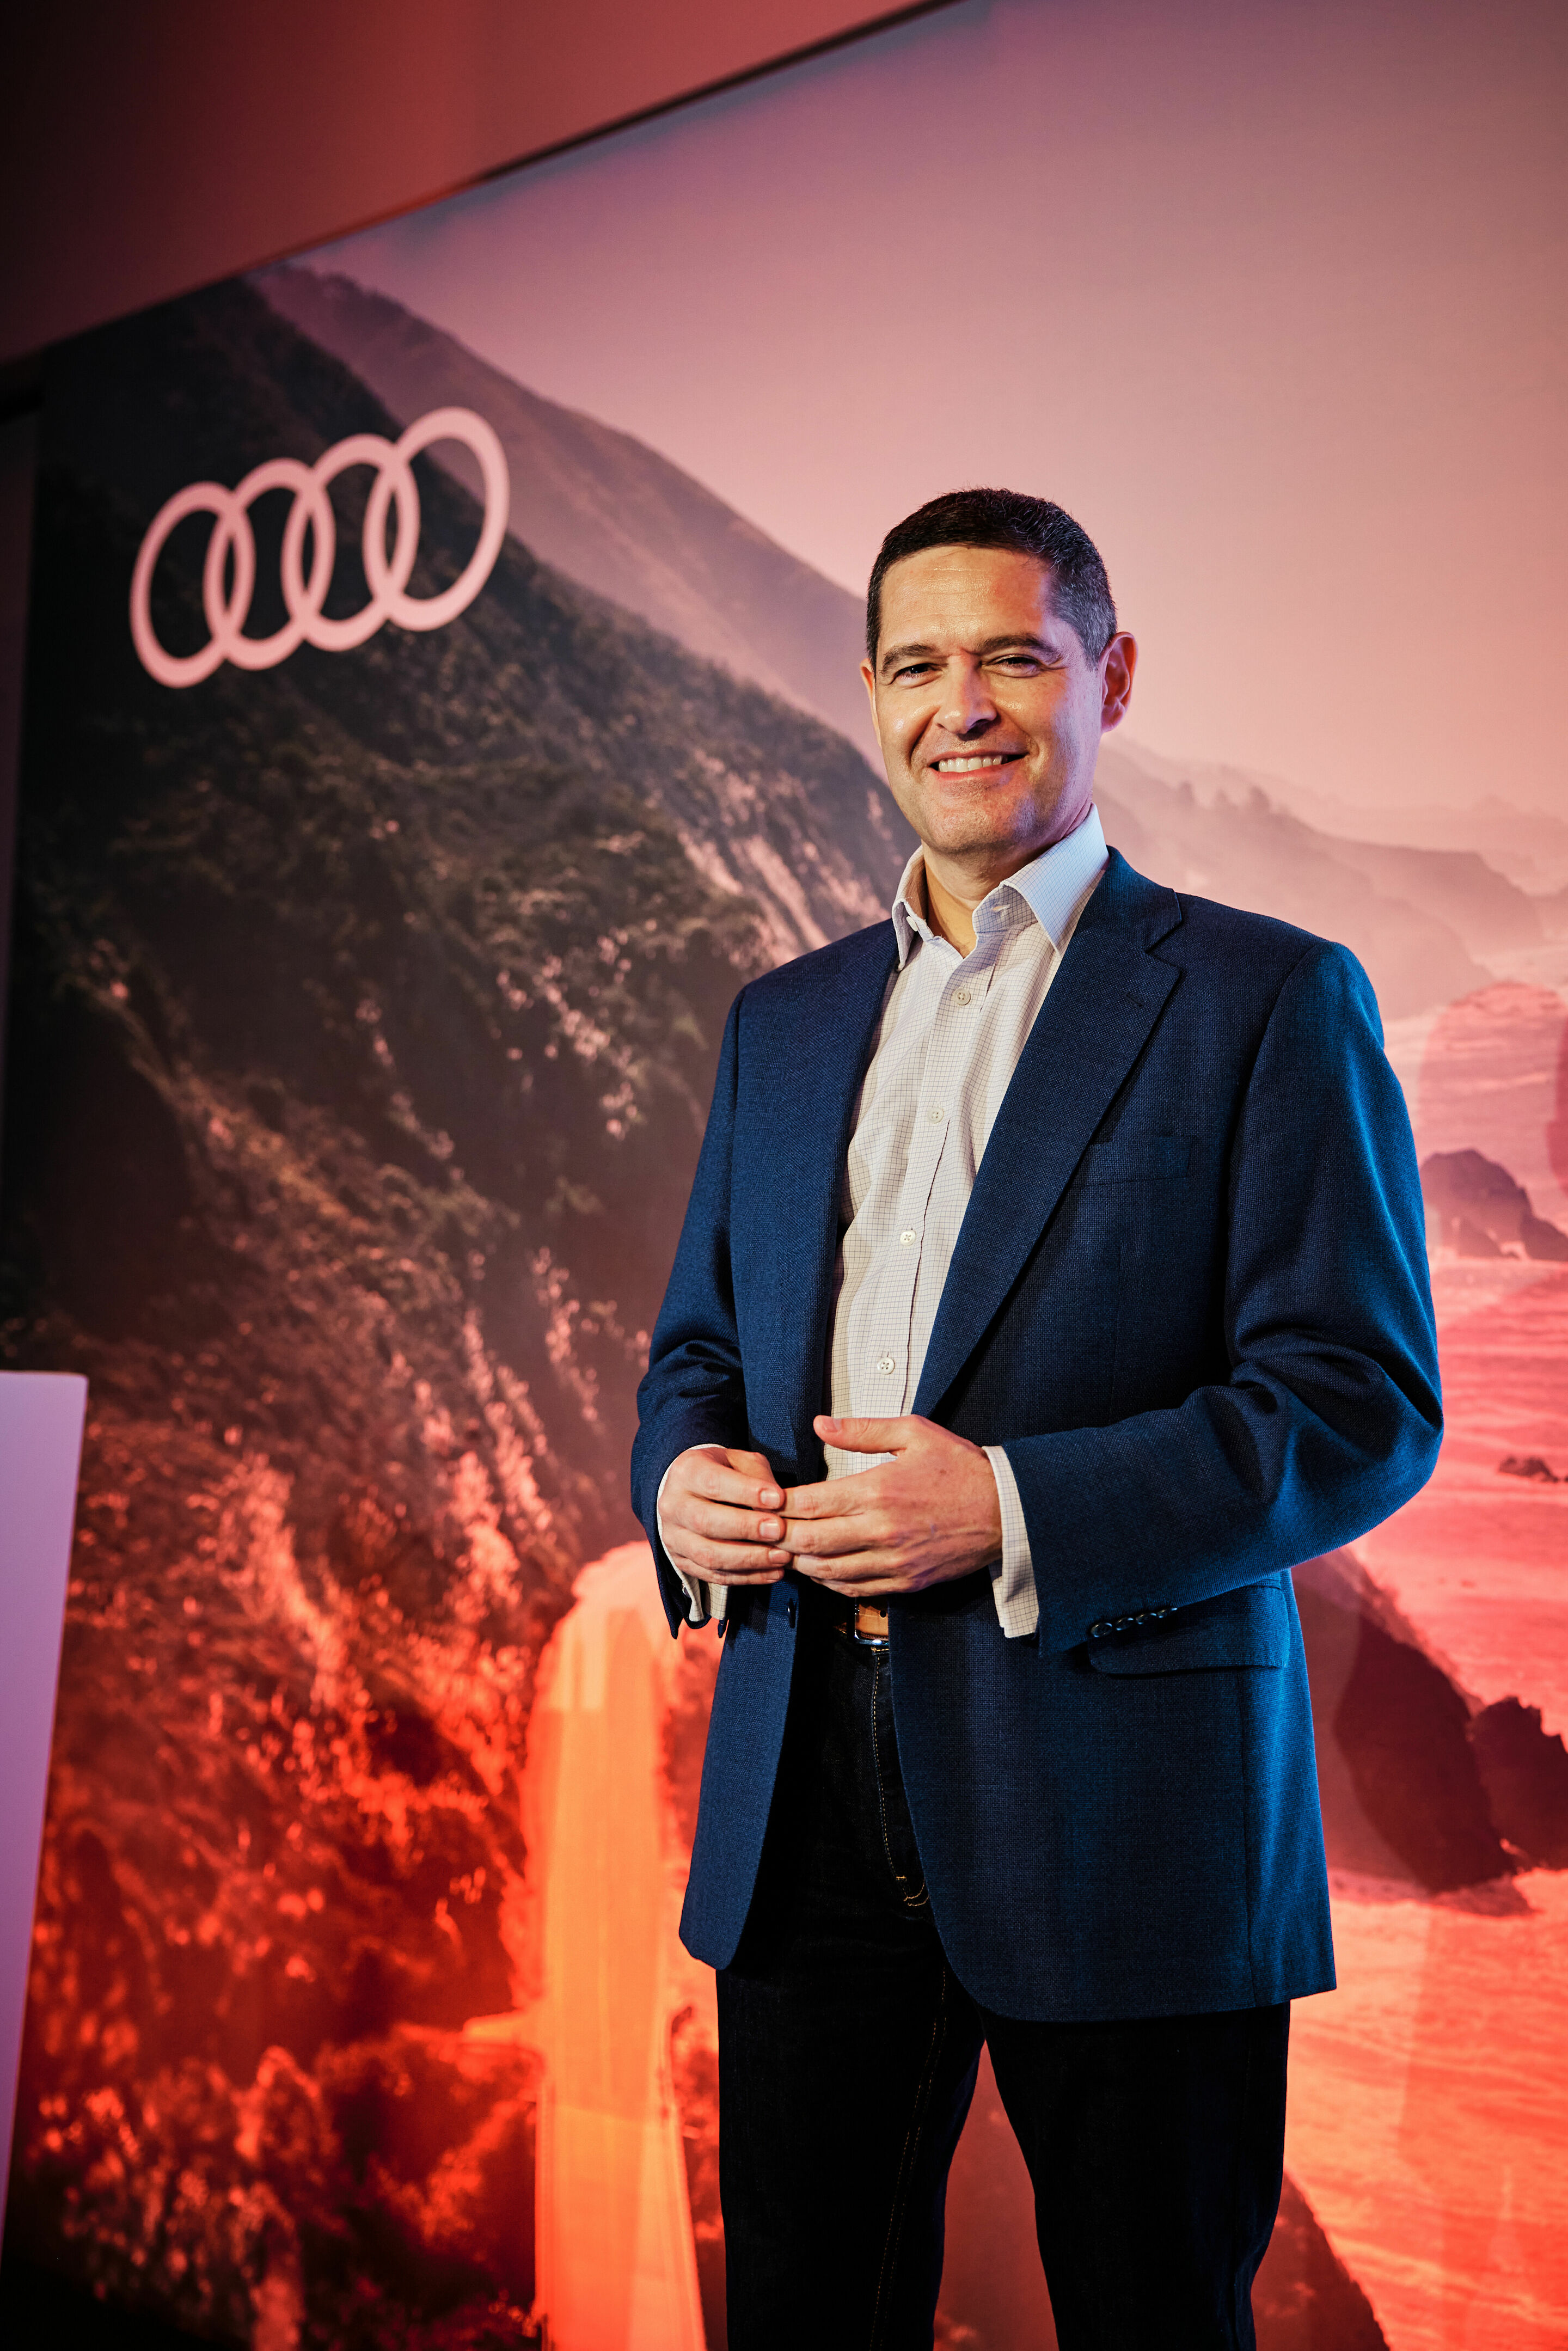 Visions of the future in Manchester: Audi brings young talents to the One Young World Summit